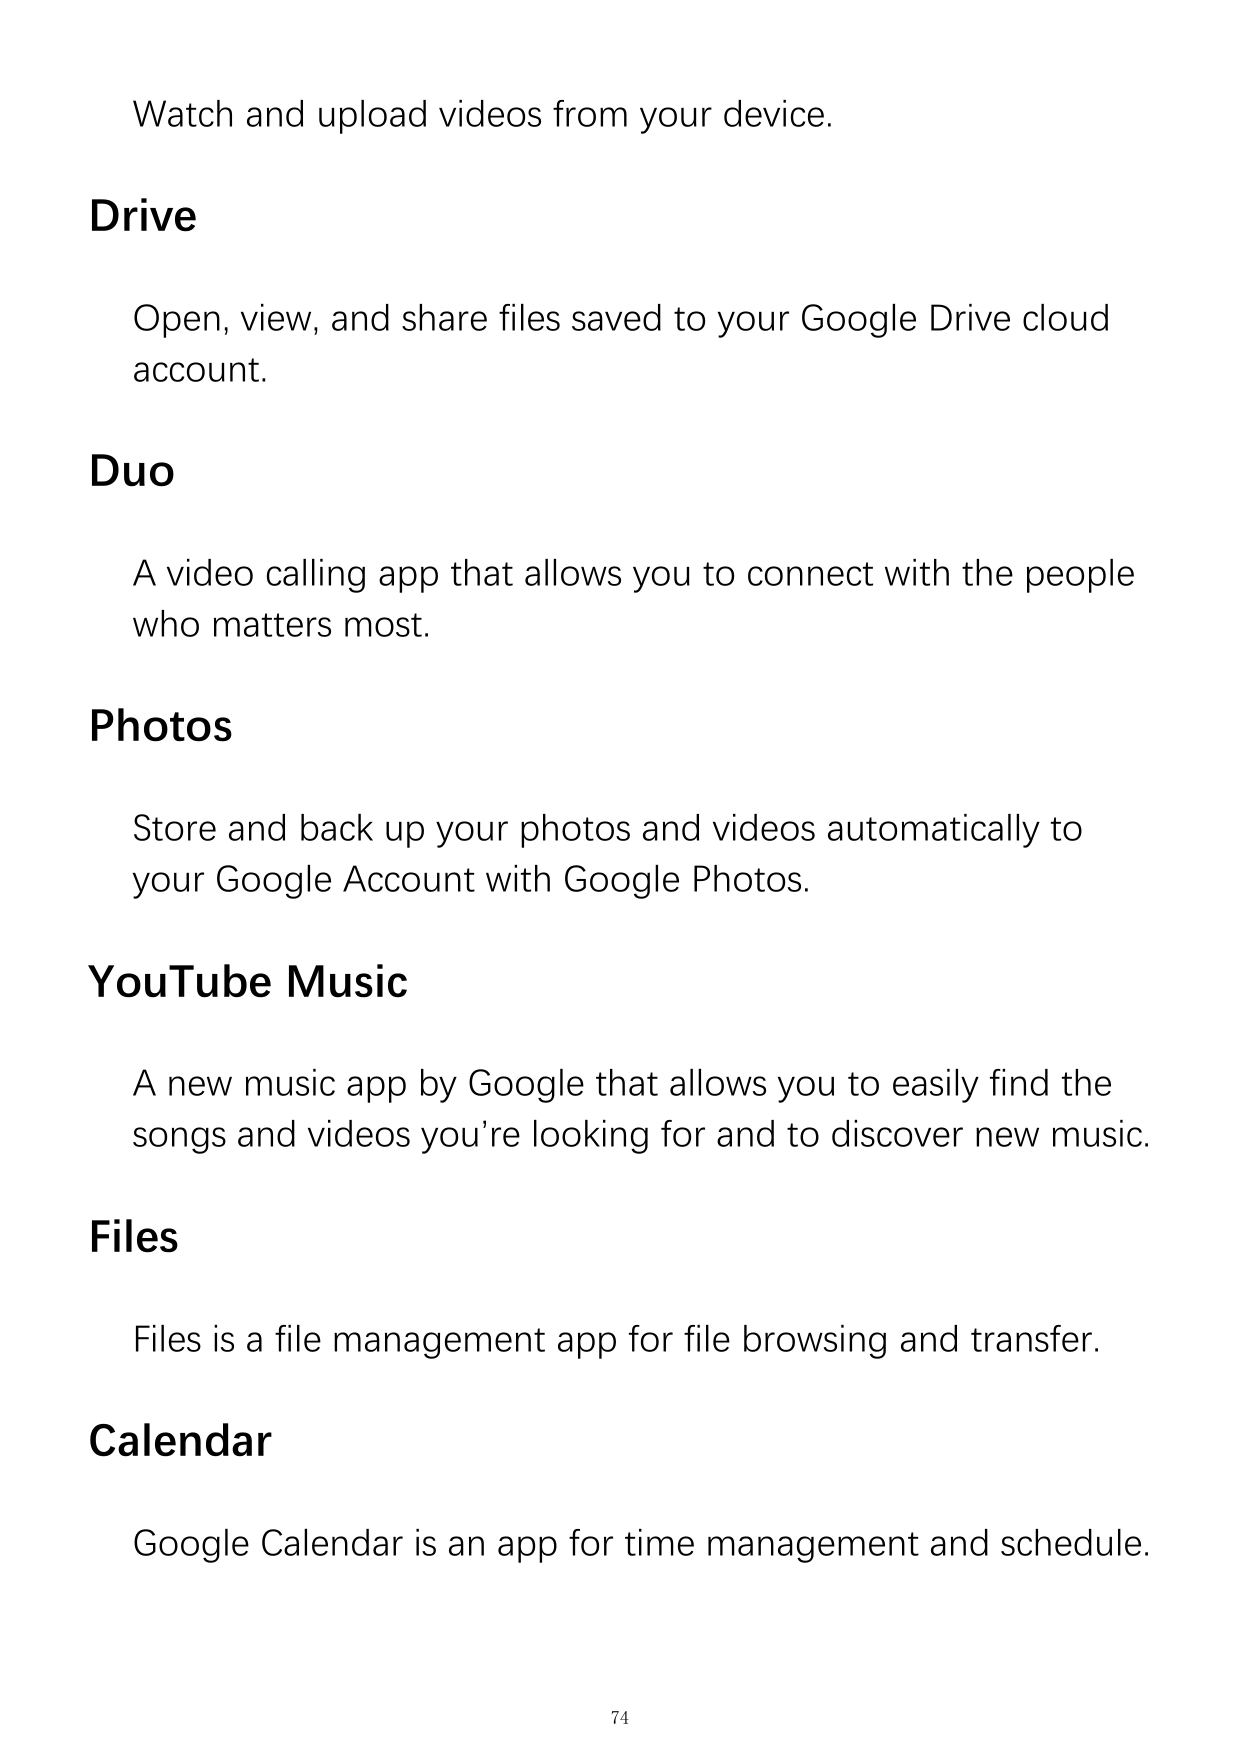 Watch and upload videos from your device.DriveOpen, view, and share files saved to your Google Drive cloudaccount.DuoA video cal